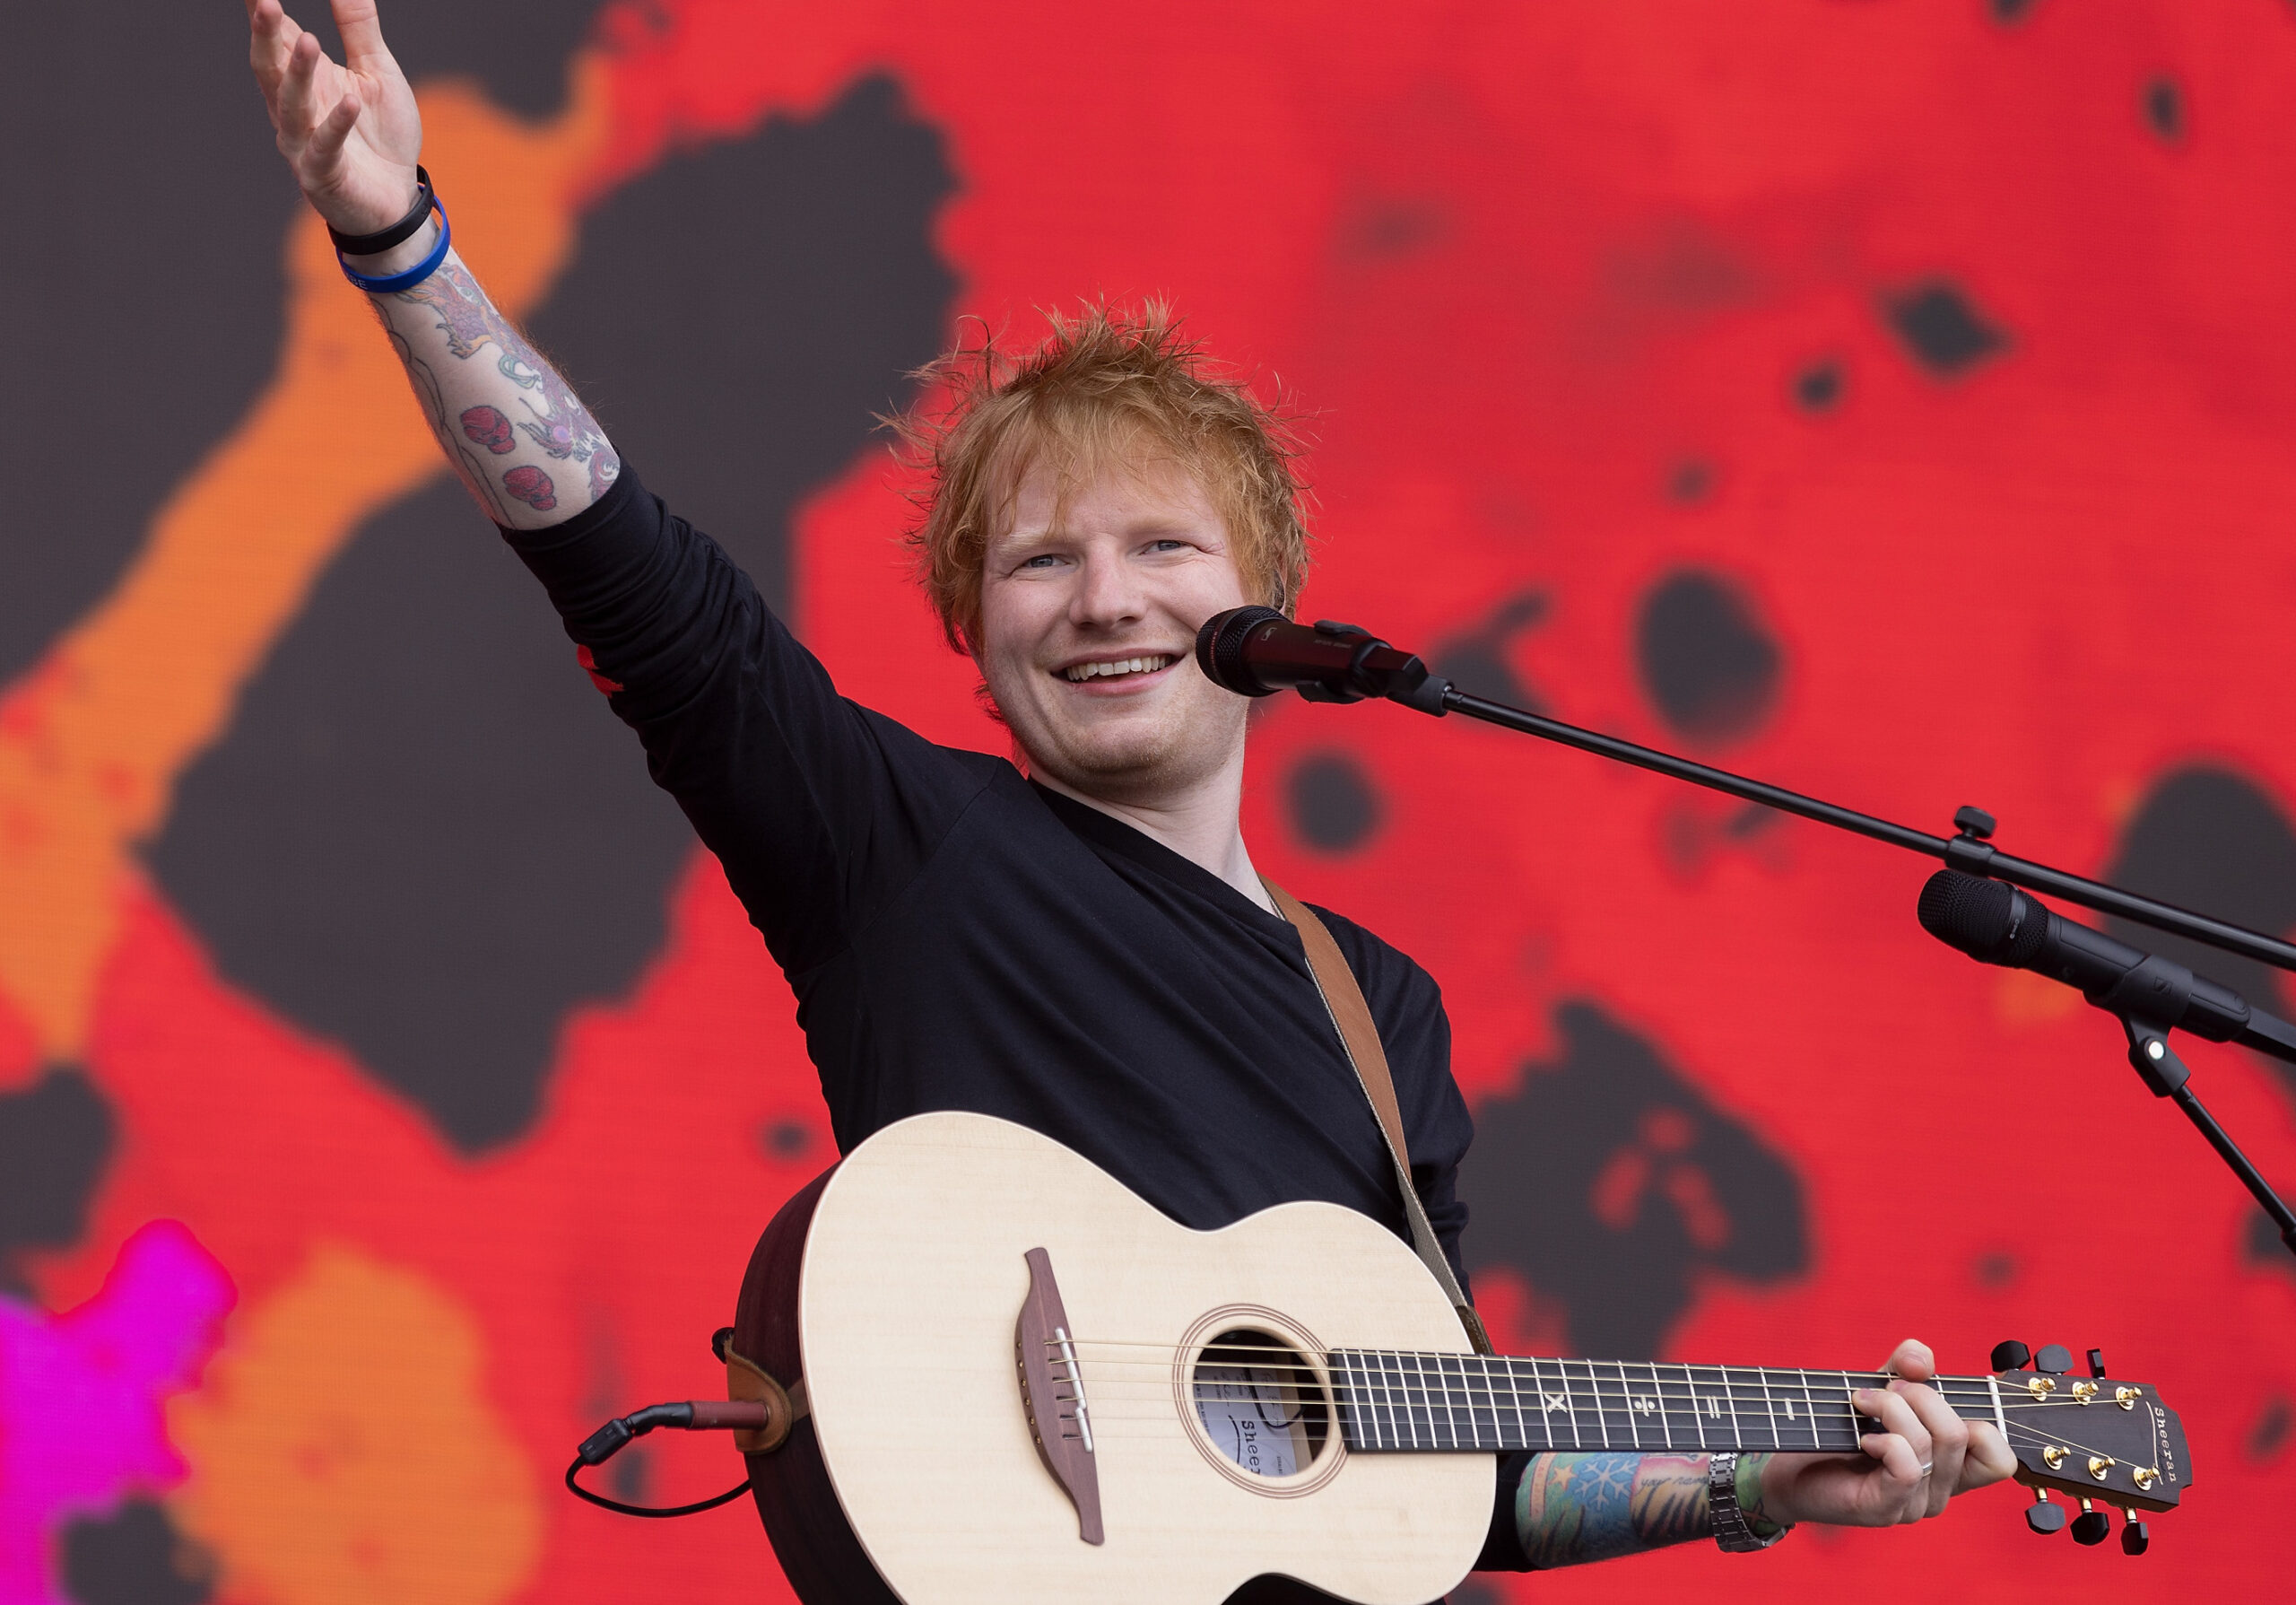 Ed Sheeran wins copyright trial and surprises NYC with street concert.